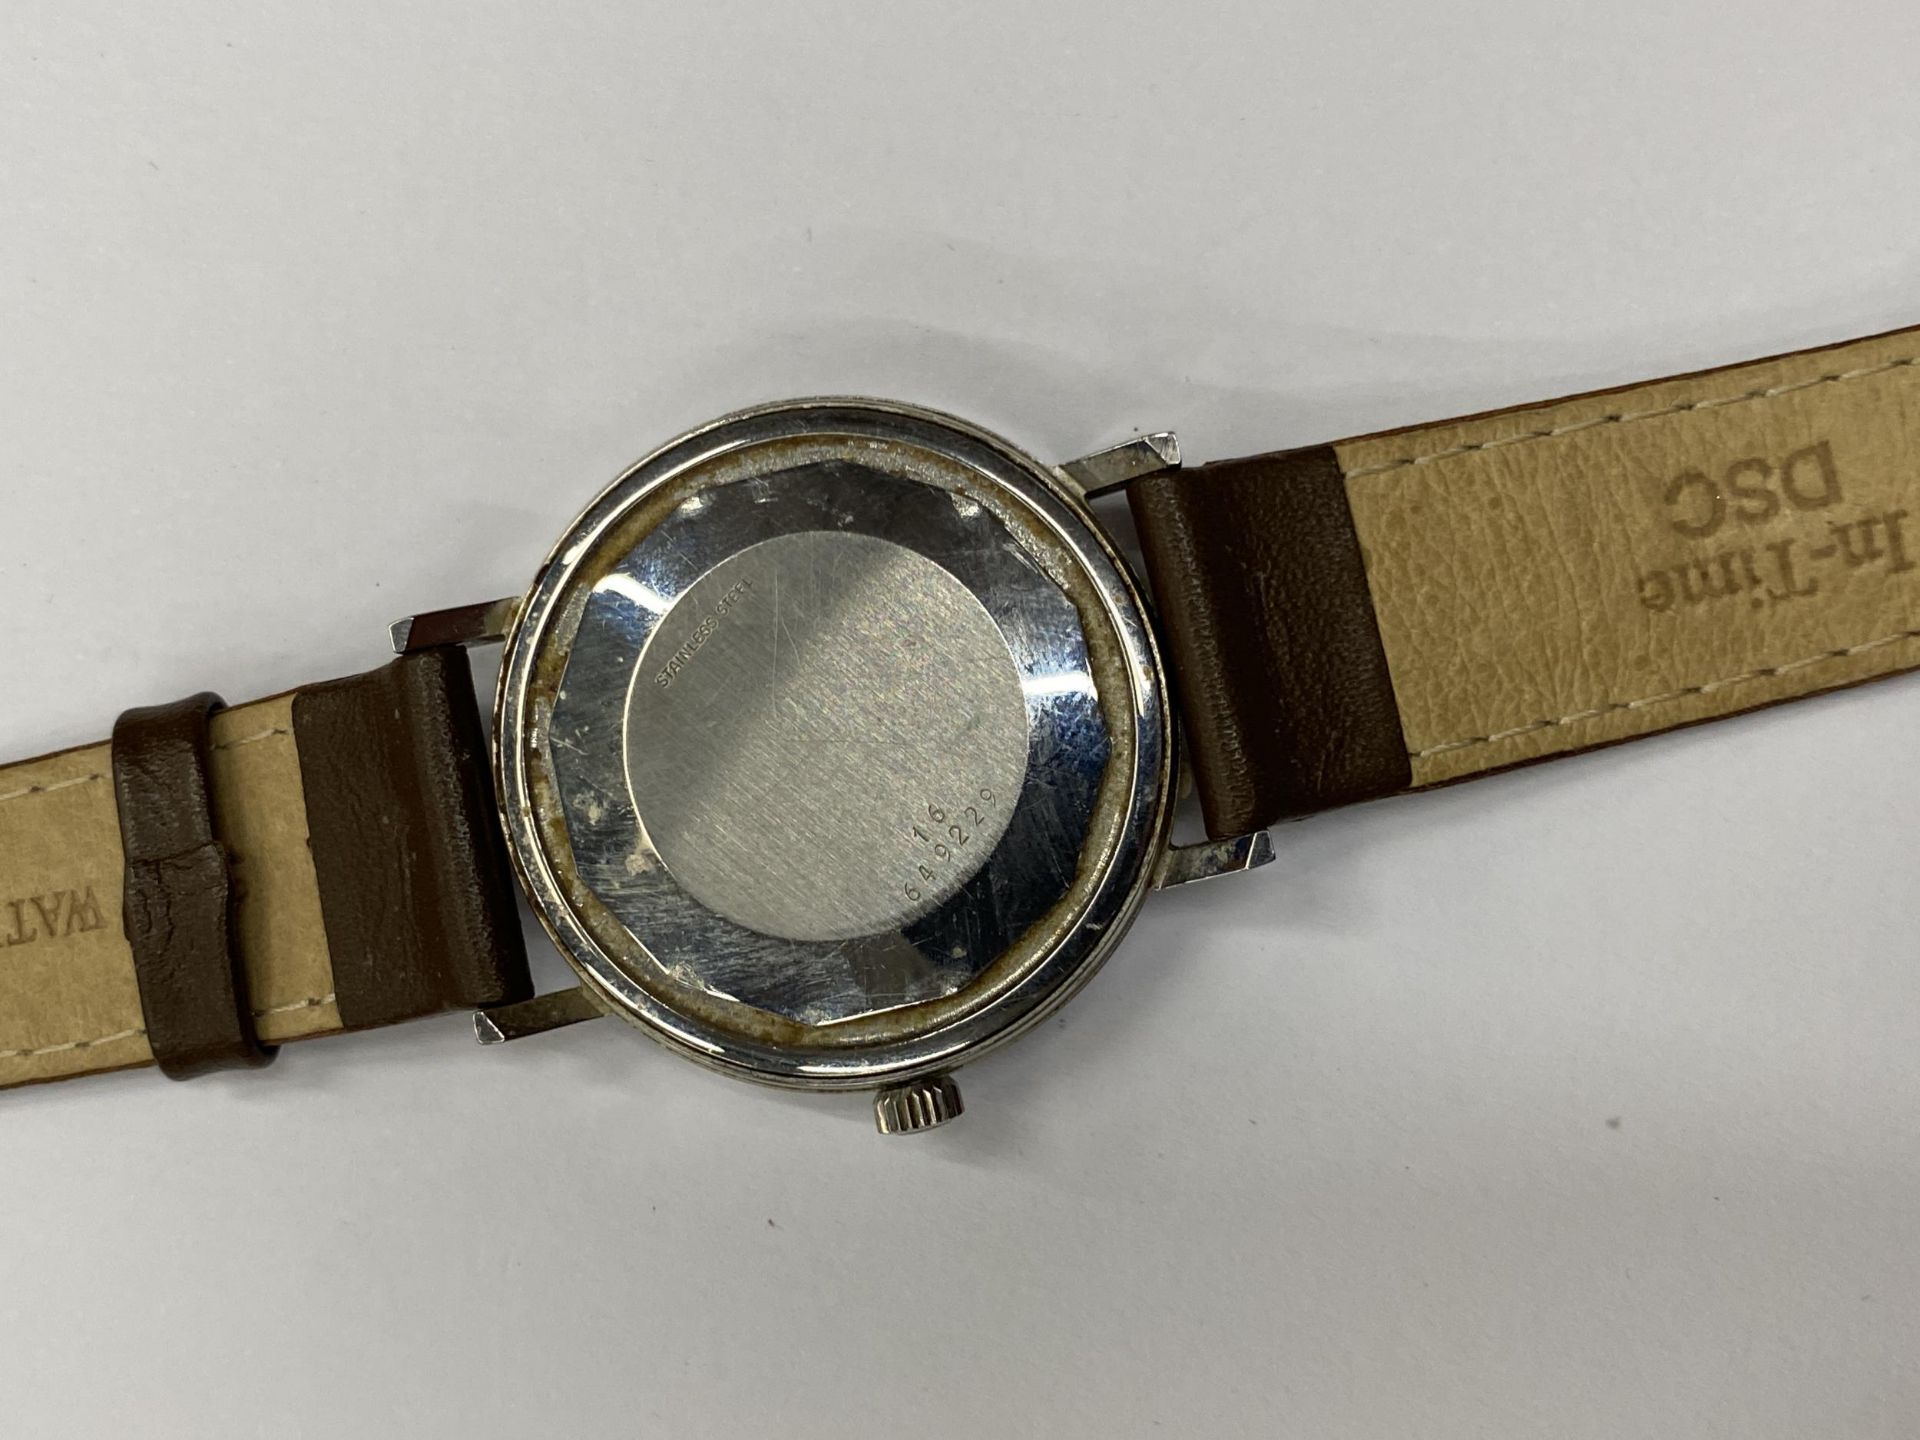 A VINTAGE LONGINES CONQUEST AUTOMATIC WRIST WATCH WITH LEATHER STRAP SEEN WORKING BUT NO WARRANTY - Image 4 of 6